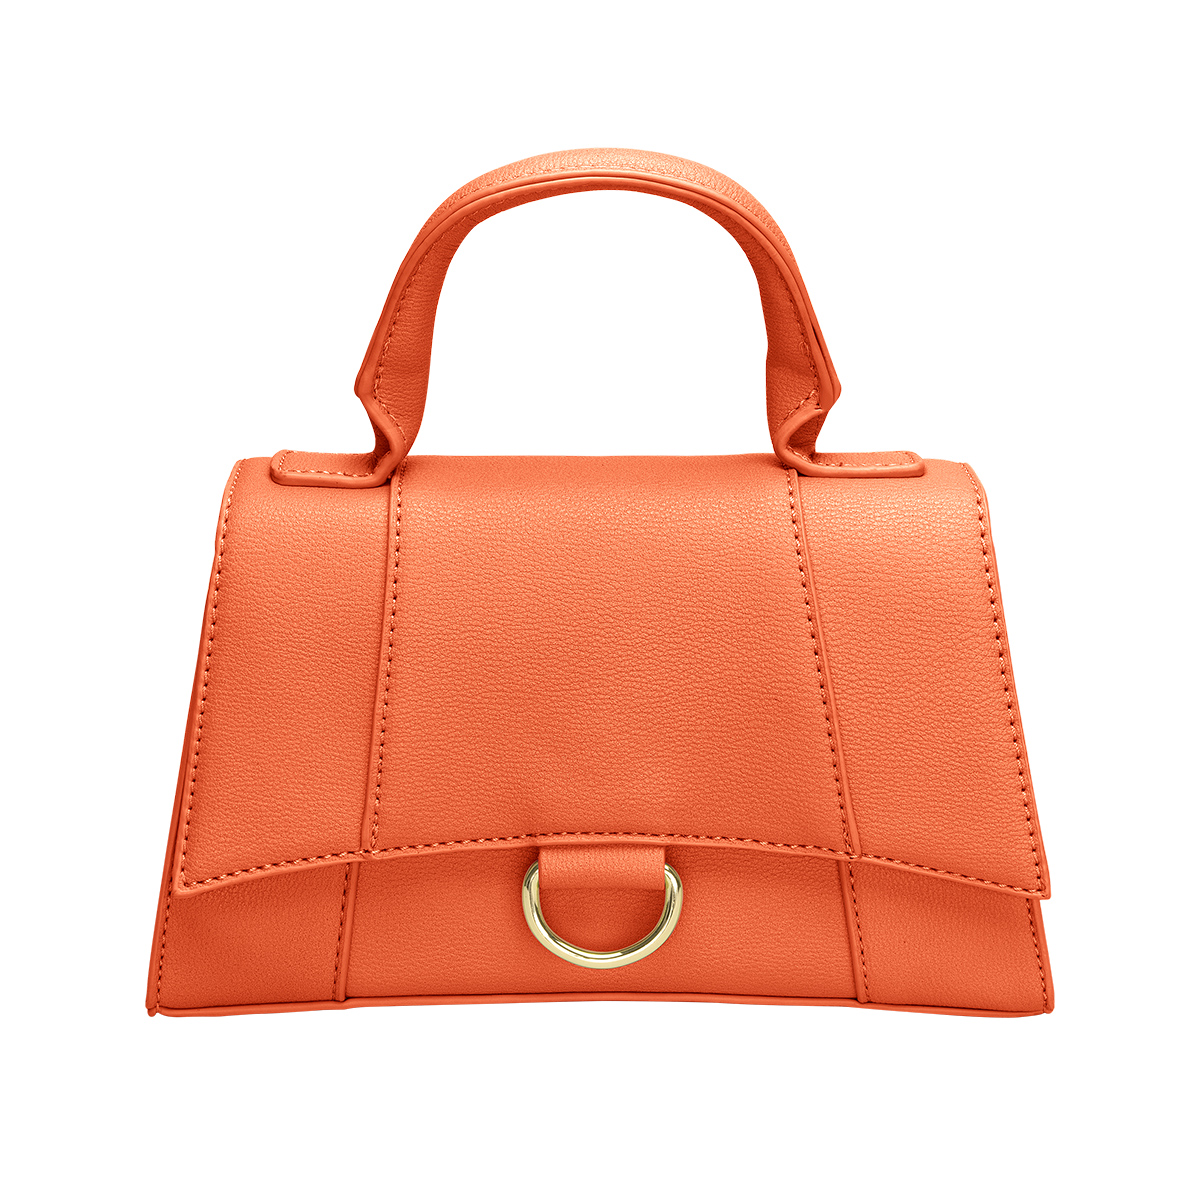 Top handle bag with ring detail